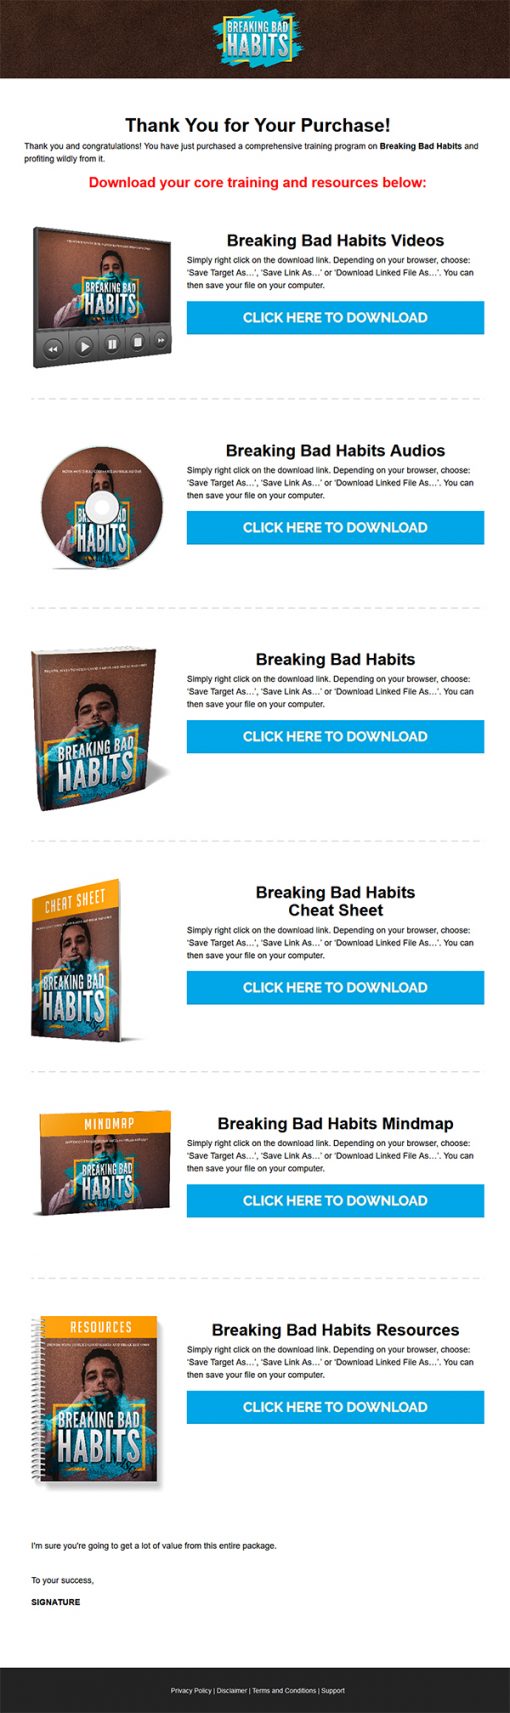 Breaking Bad Habits Ebook and Videos MRR